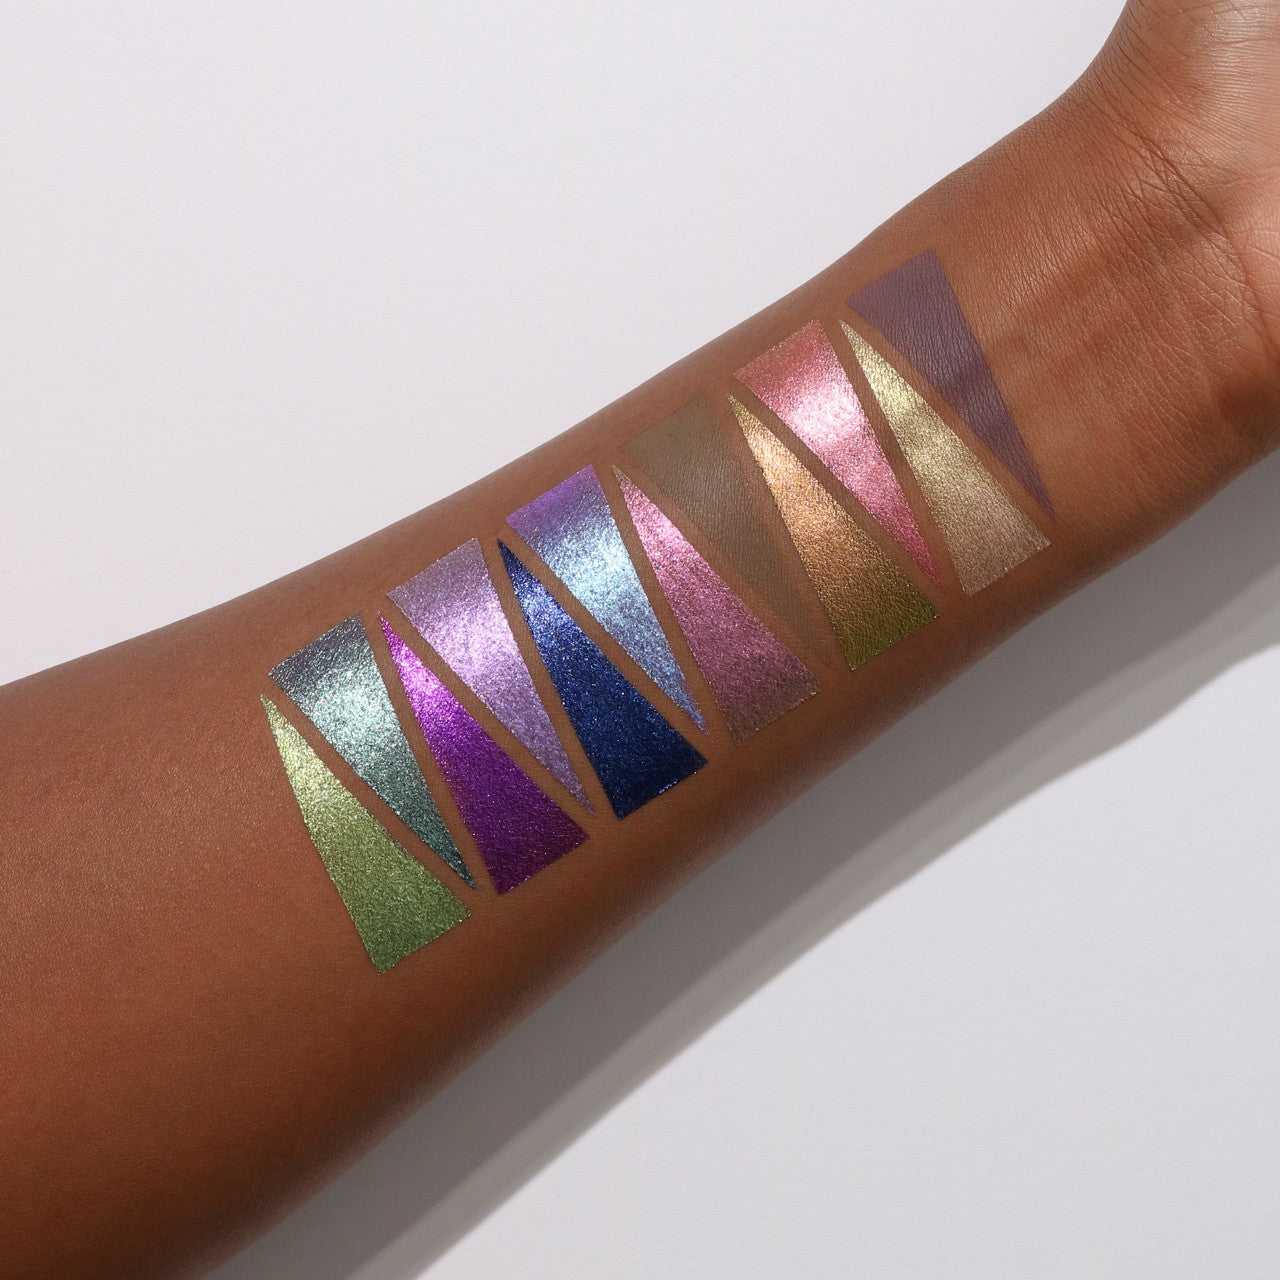 Ninhydrin palette swatches by Adept Cosmetics